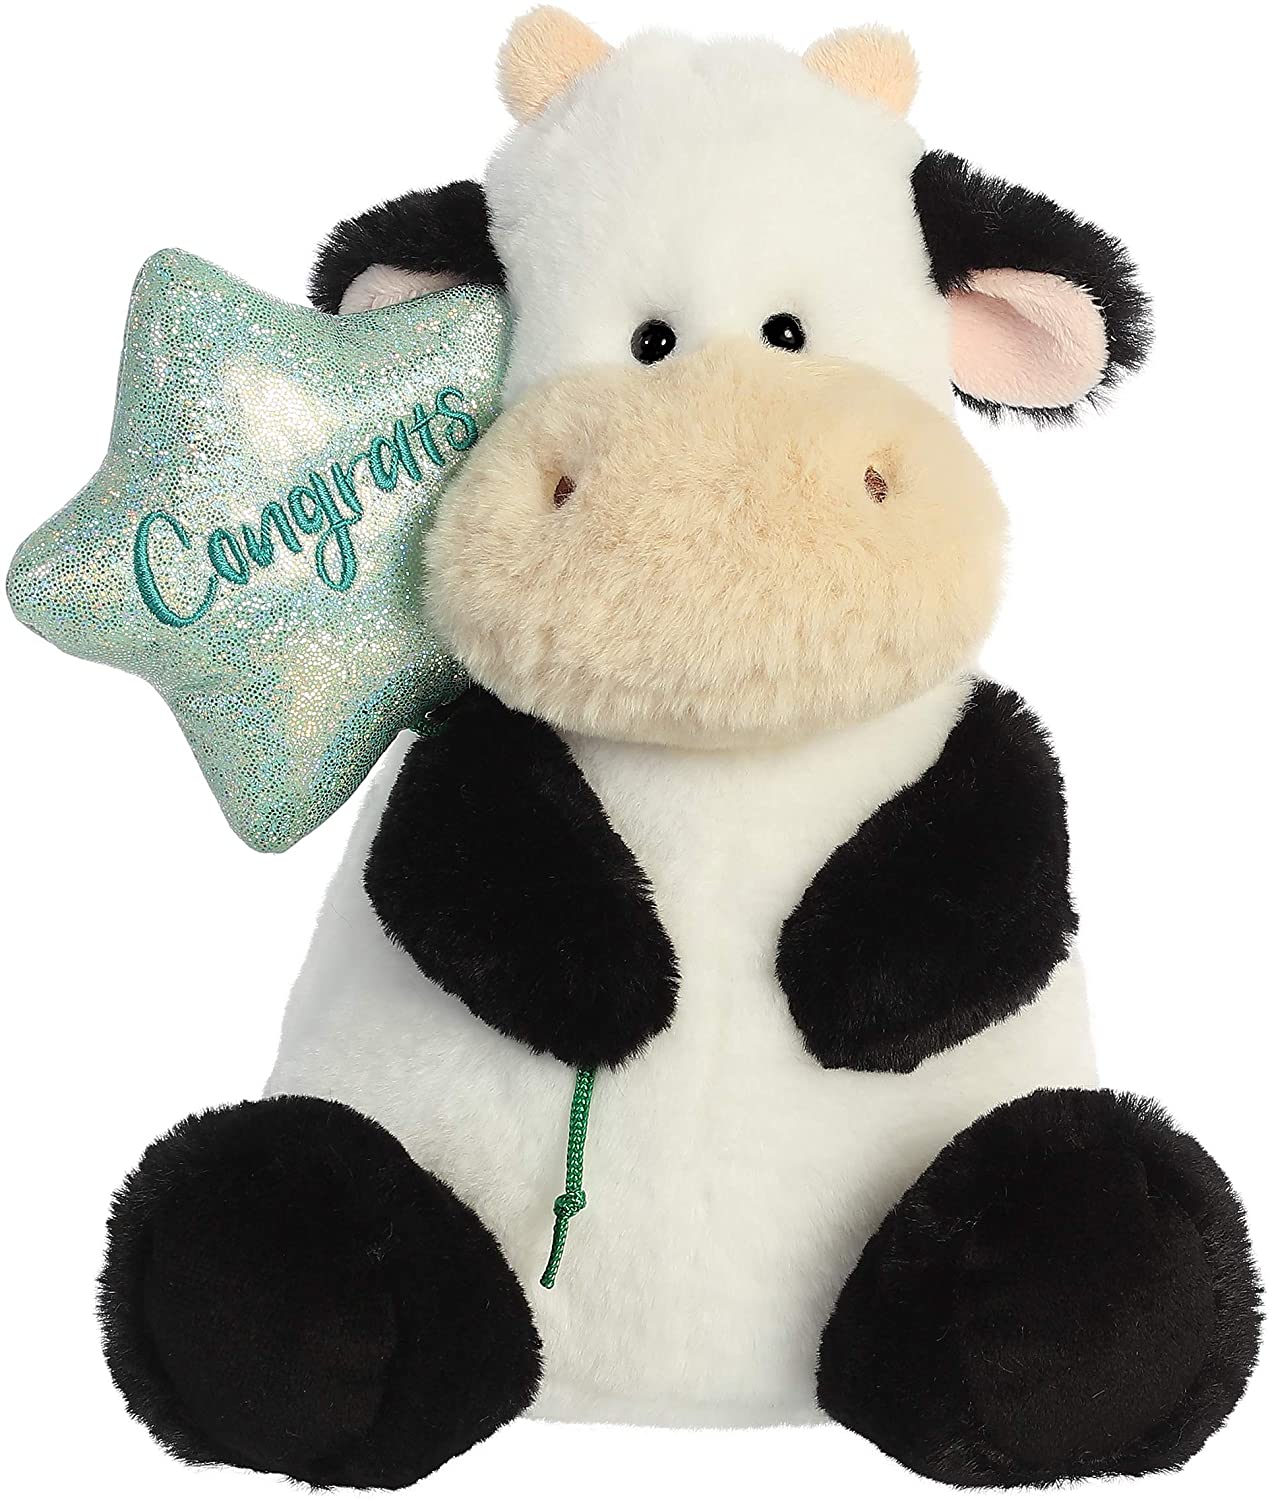 Happy Cow.  11 inches in size. High quality materials make for a soft and fluffy touch. Quality materials for a soft cuddling experience "Congrats" Embroidered in teal detailing. Bean-filled to sit in an upright position.